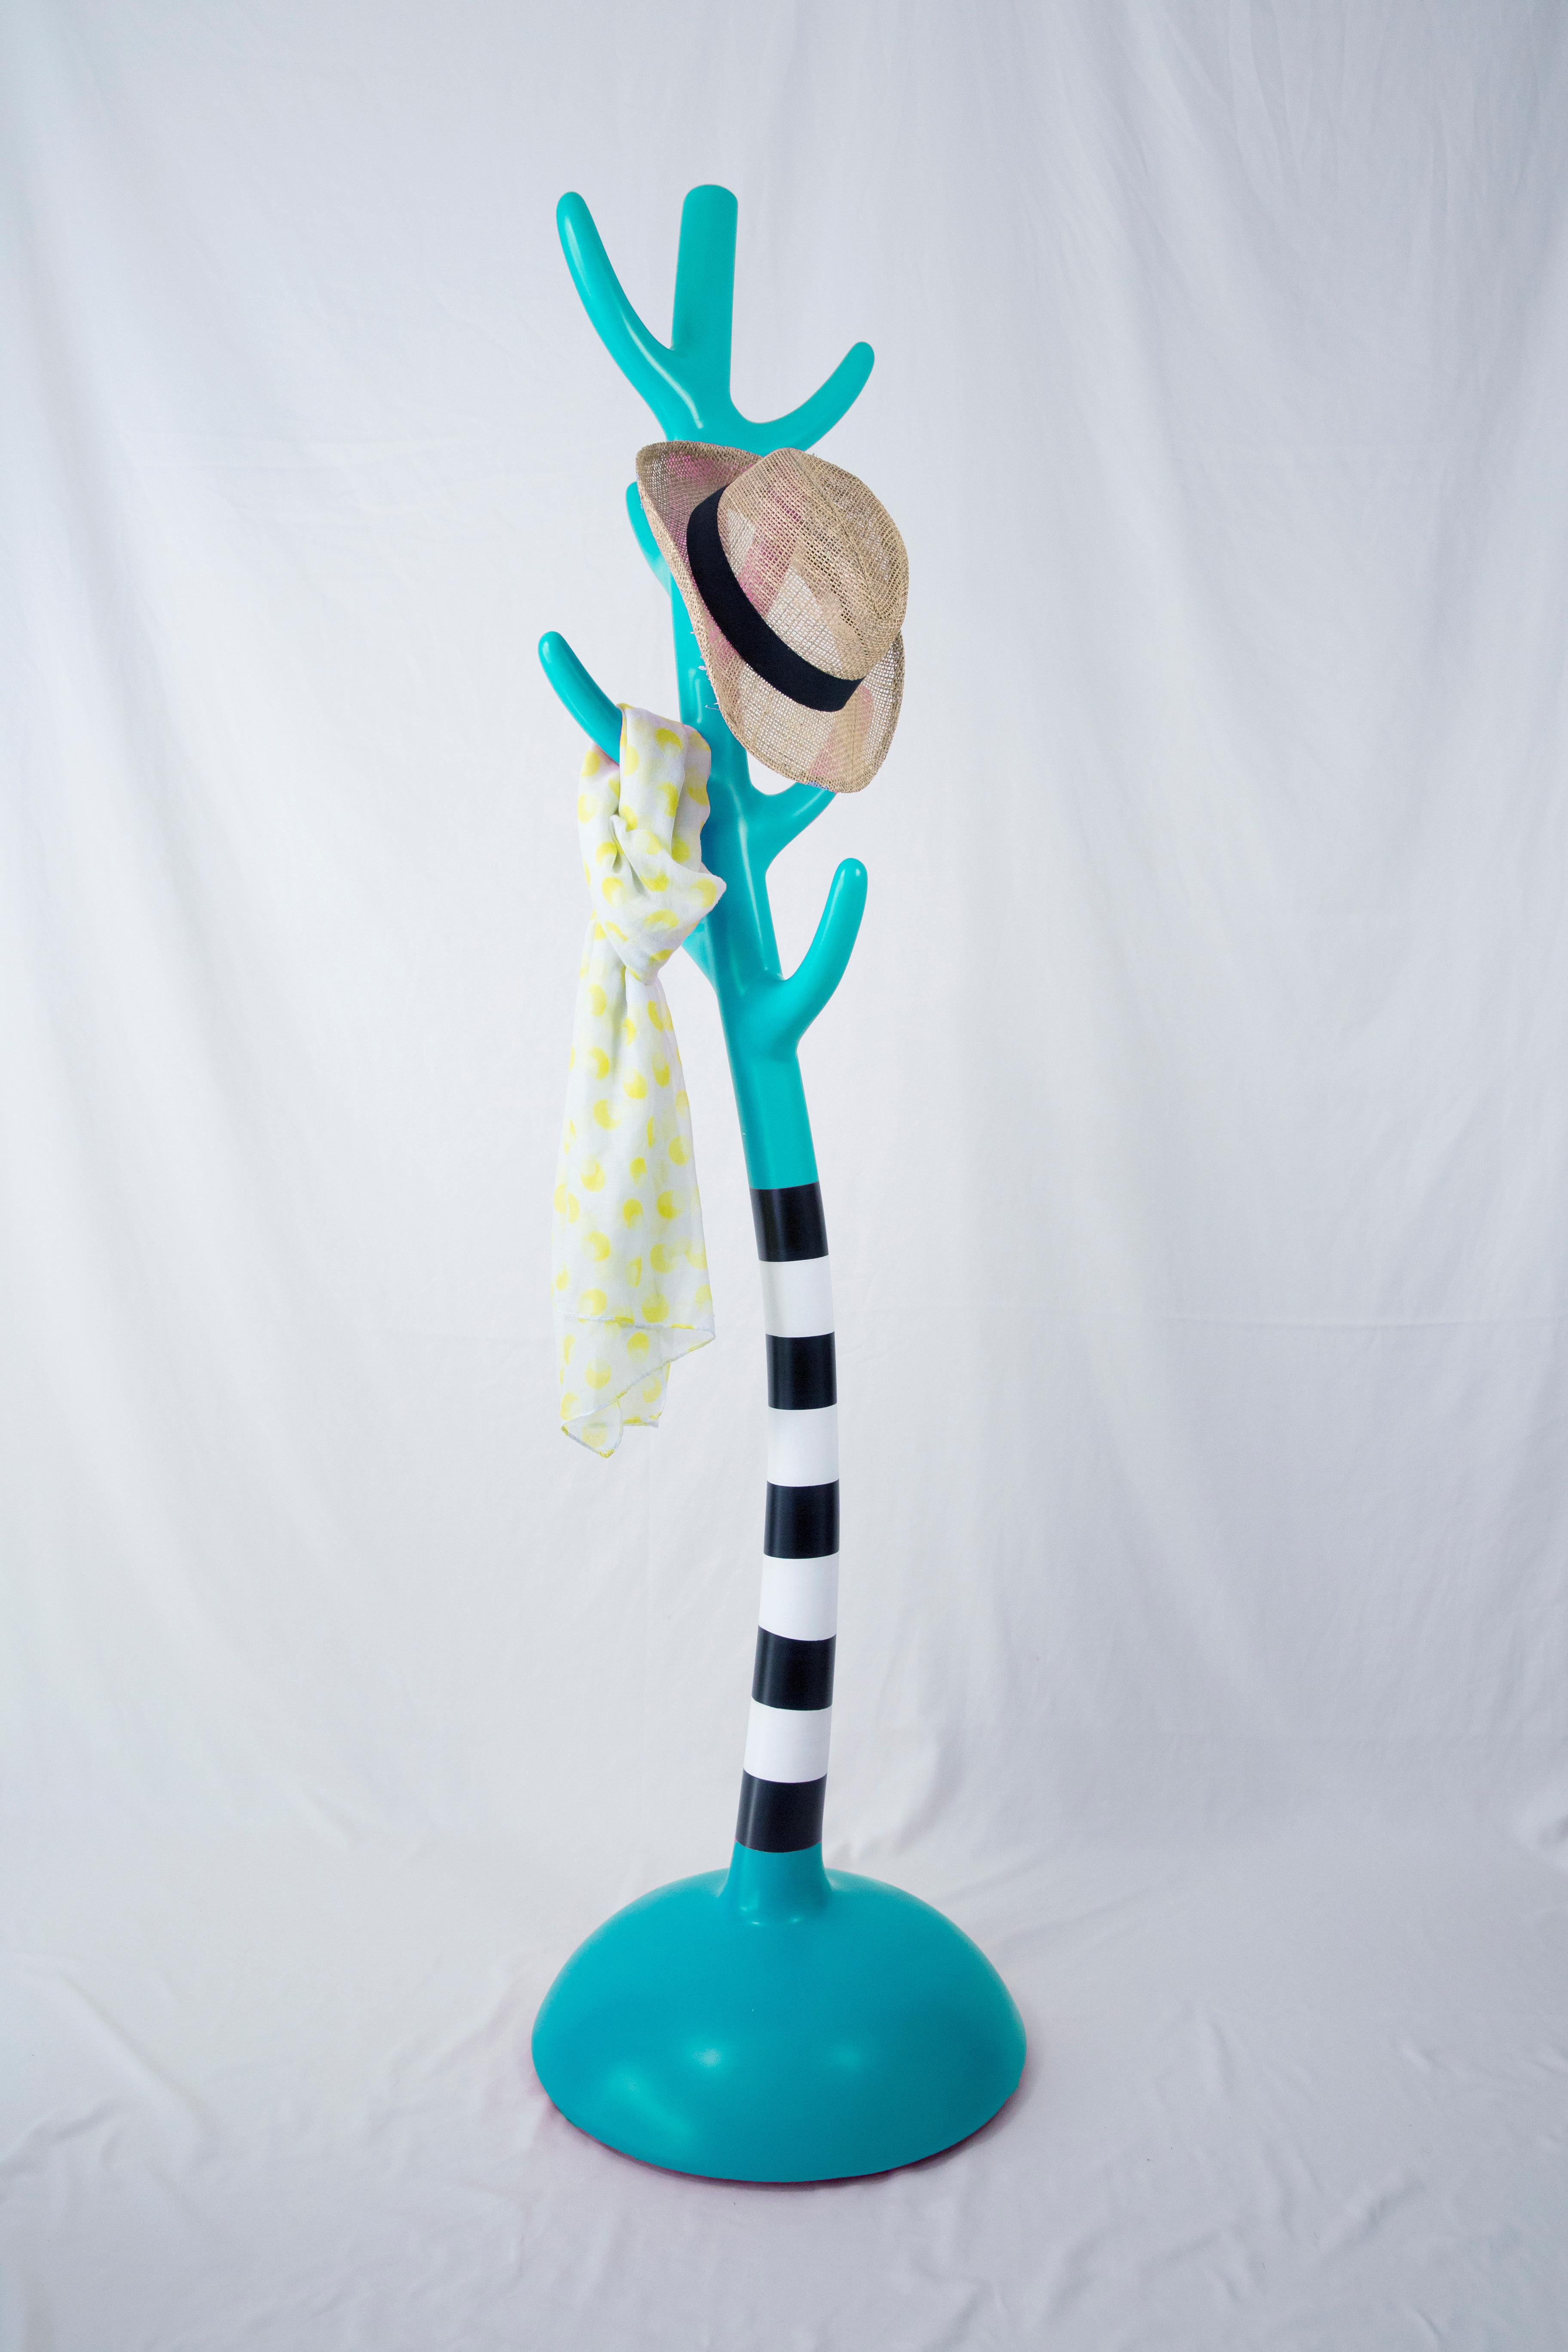 Crooked Turquoise Colourful Coat Rack, Amorphous Sculpture, Artistic In New Condition For Sale In Istanbul, Maltepe